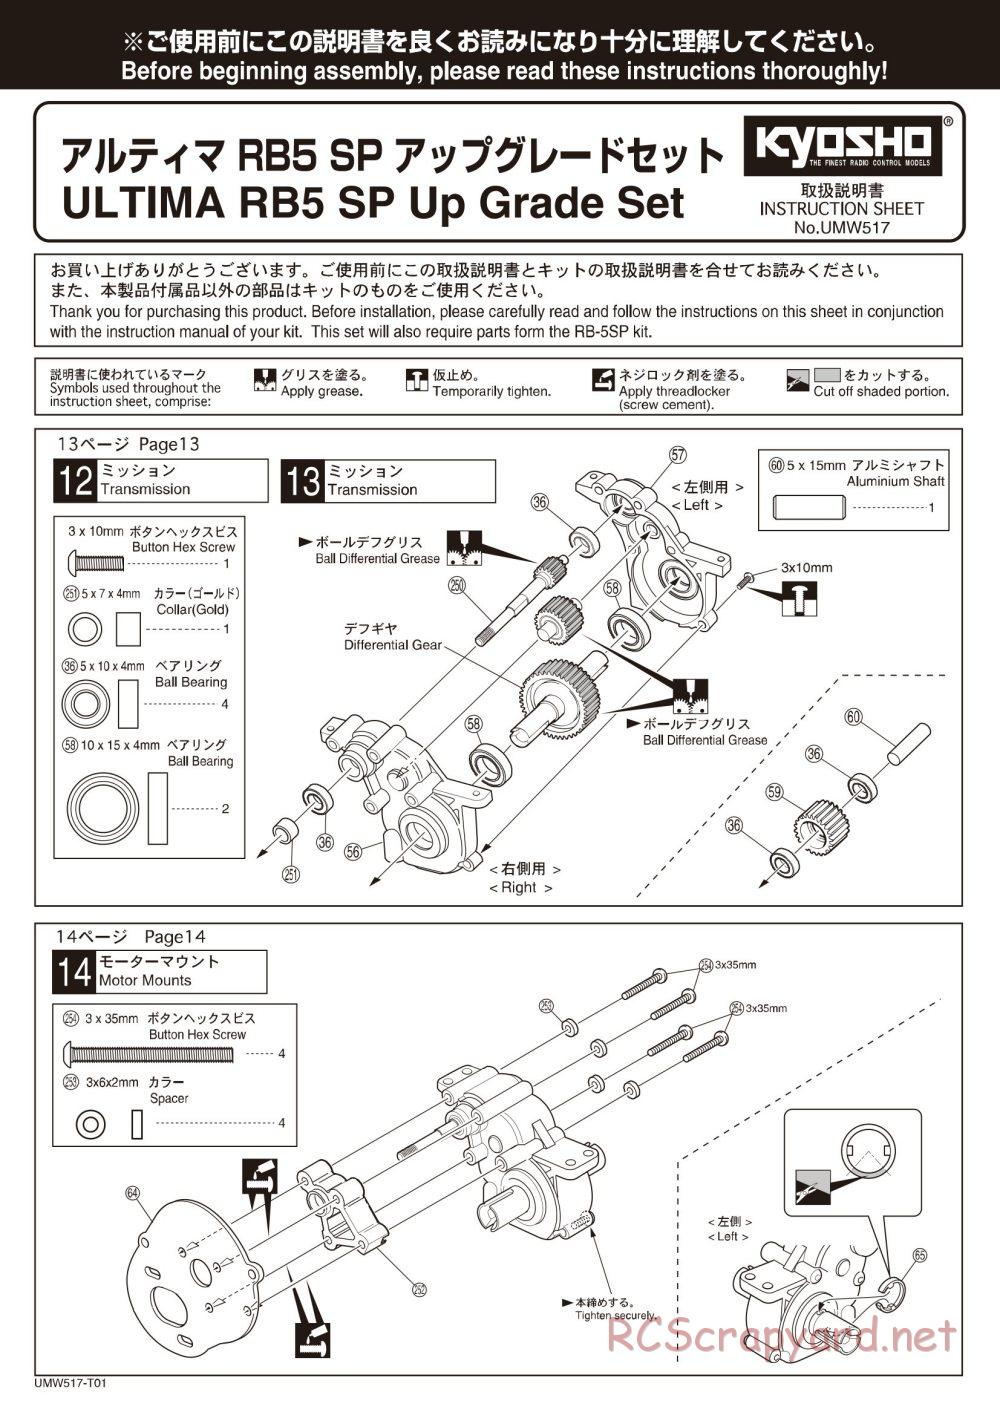 Kyosho - Ultima RB5 SP2 - Manual - Page 1